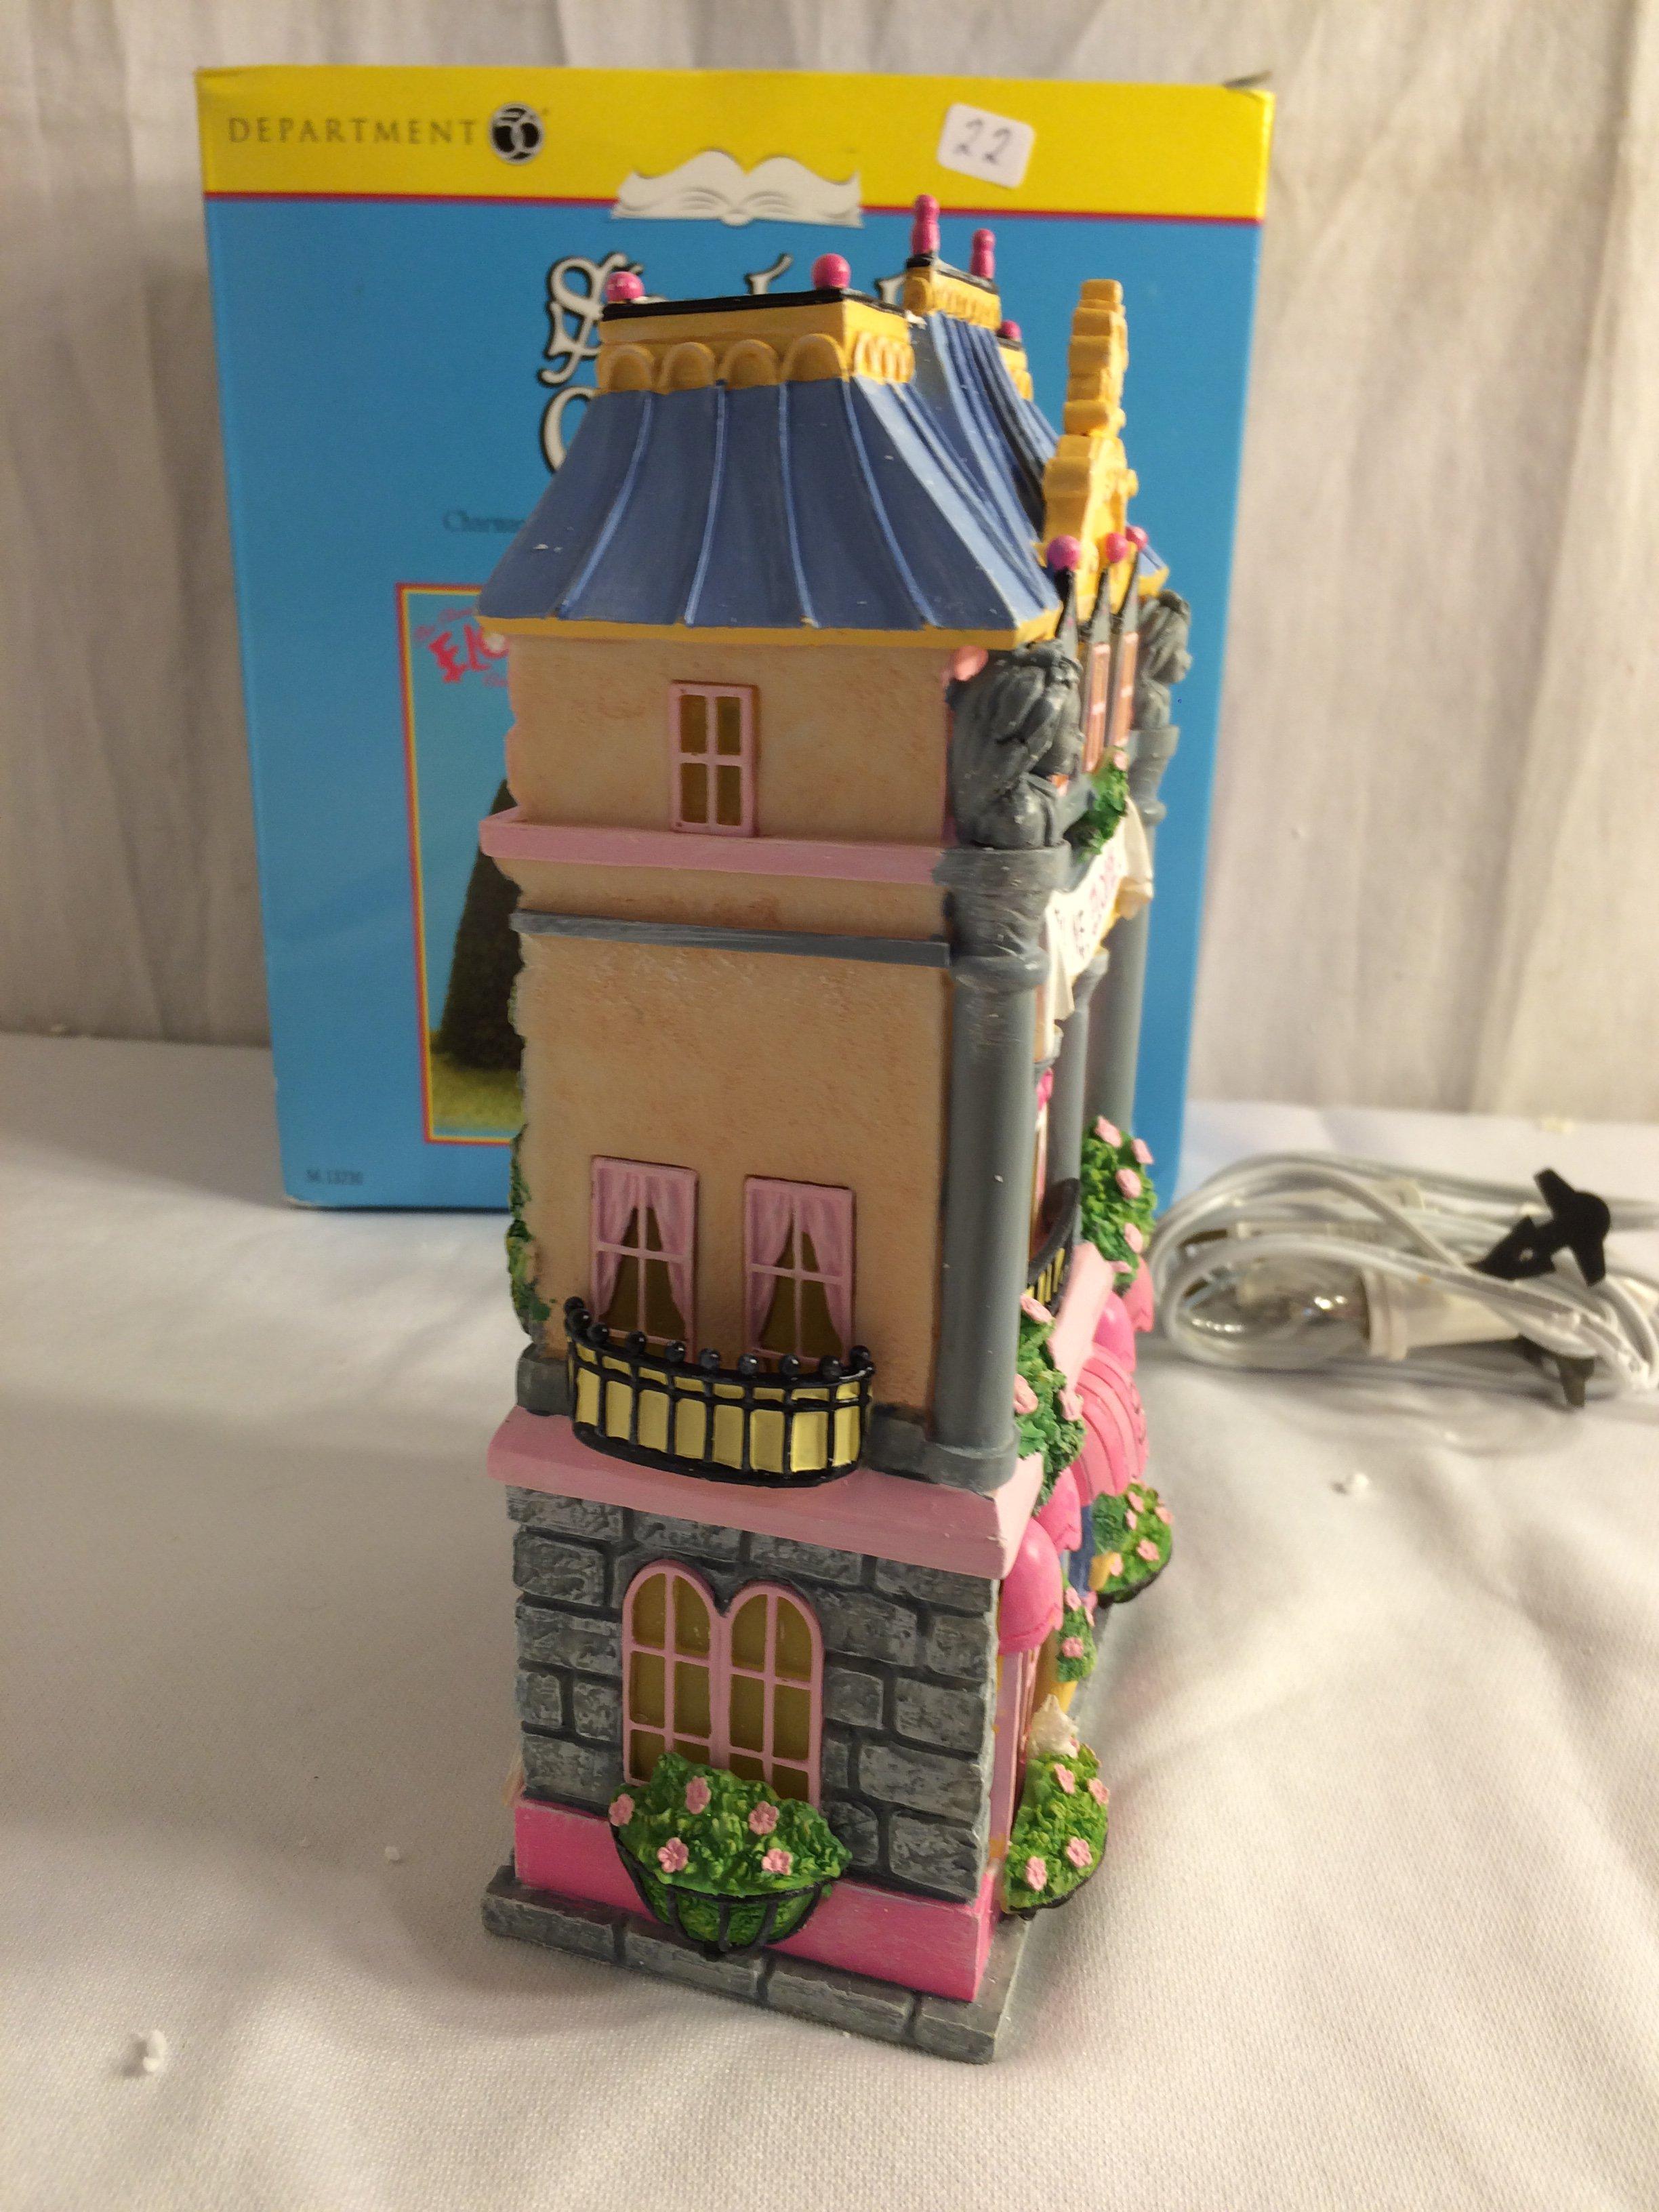 Storybook Village Collection "Eloise At Home" 56.13230 Handpainted Lighted Building 10.5"T by 9"Widt